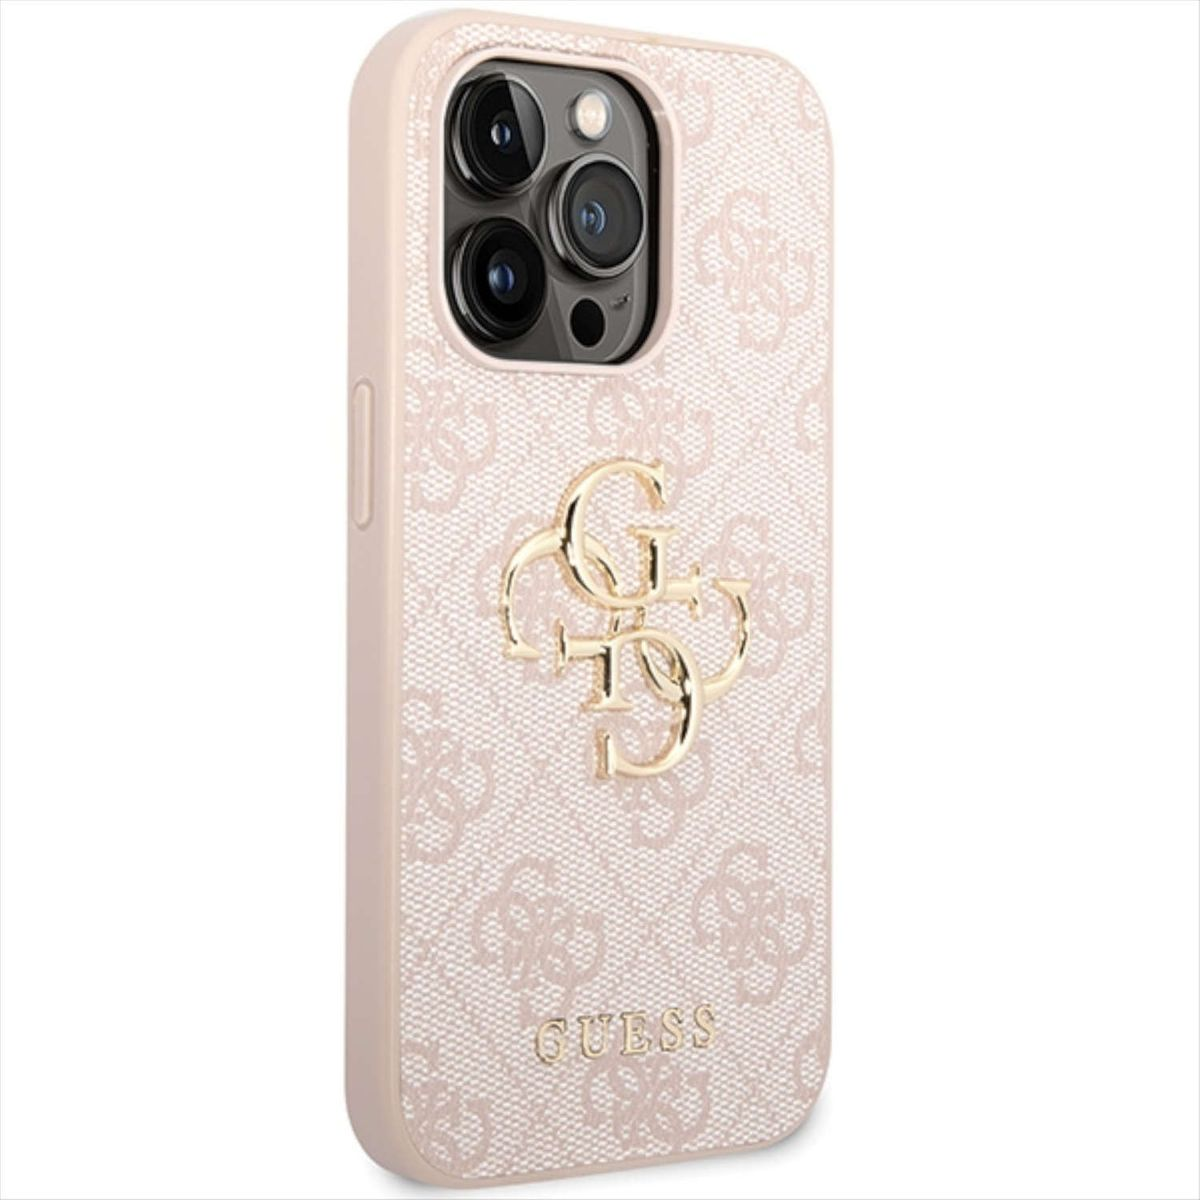 GUESS 4G 15 Design Gold iPhone Metal Hülle, Logo Pink Apple, Backcover, Pro